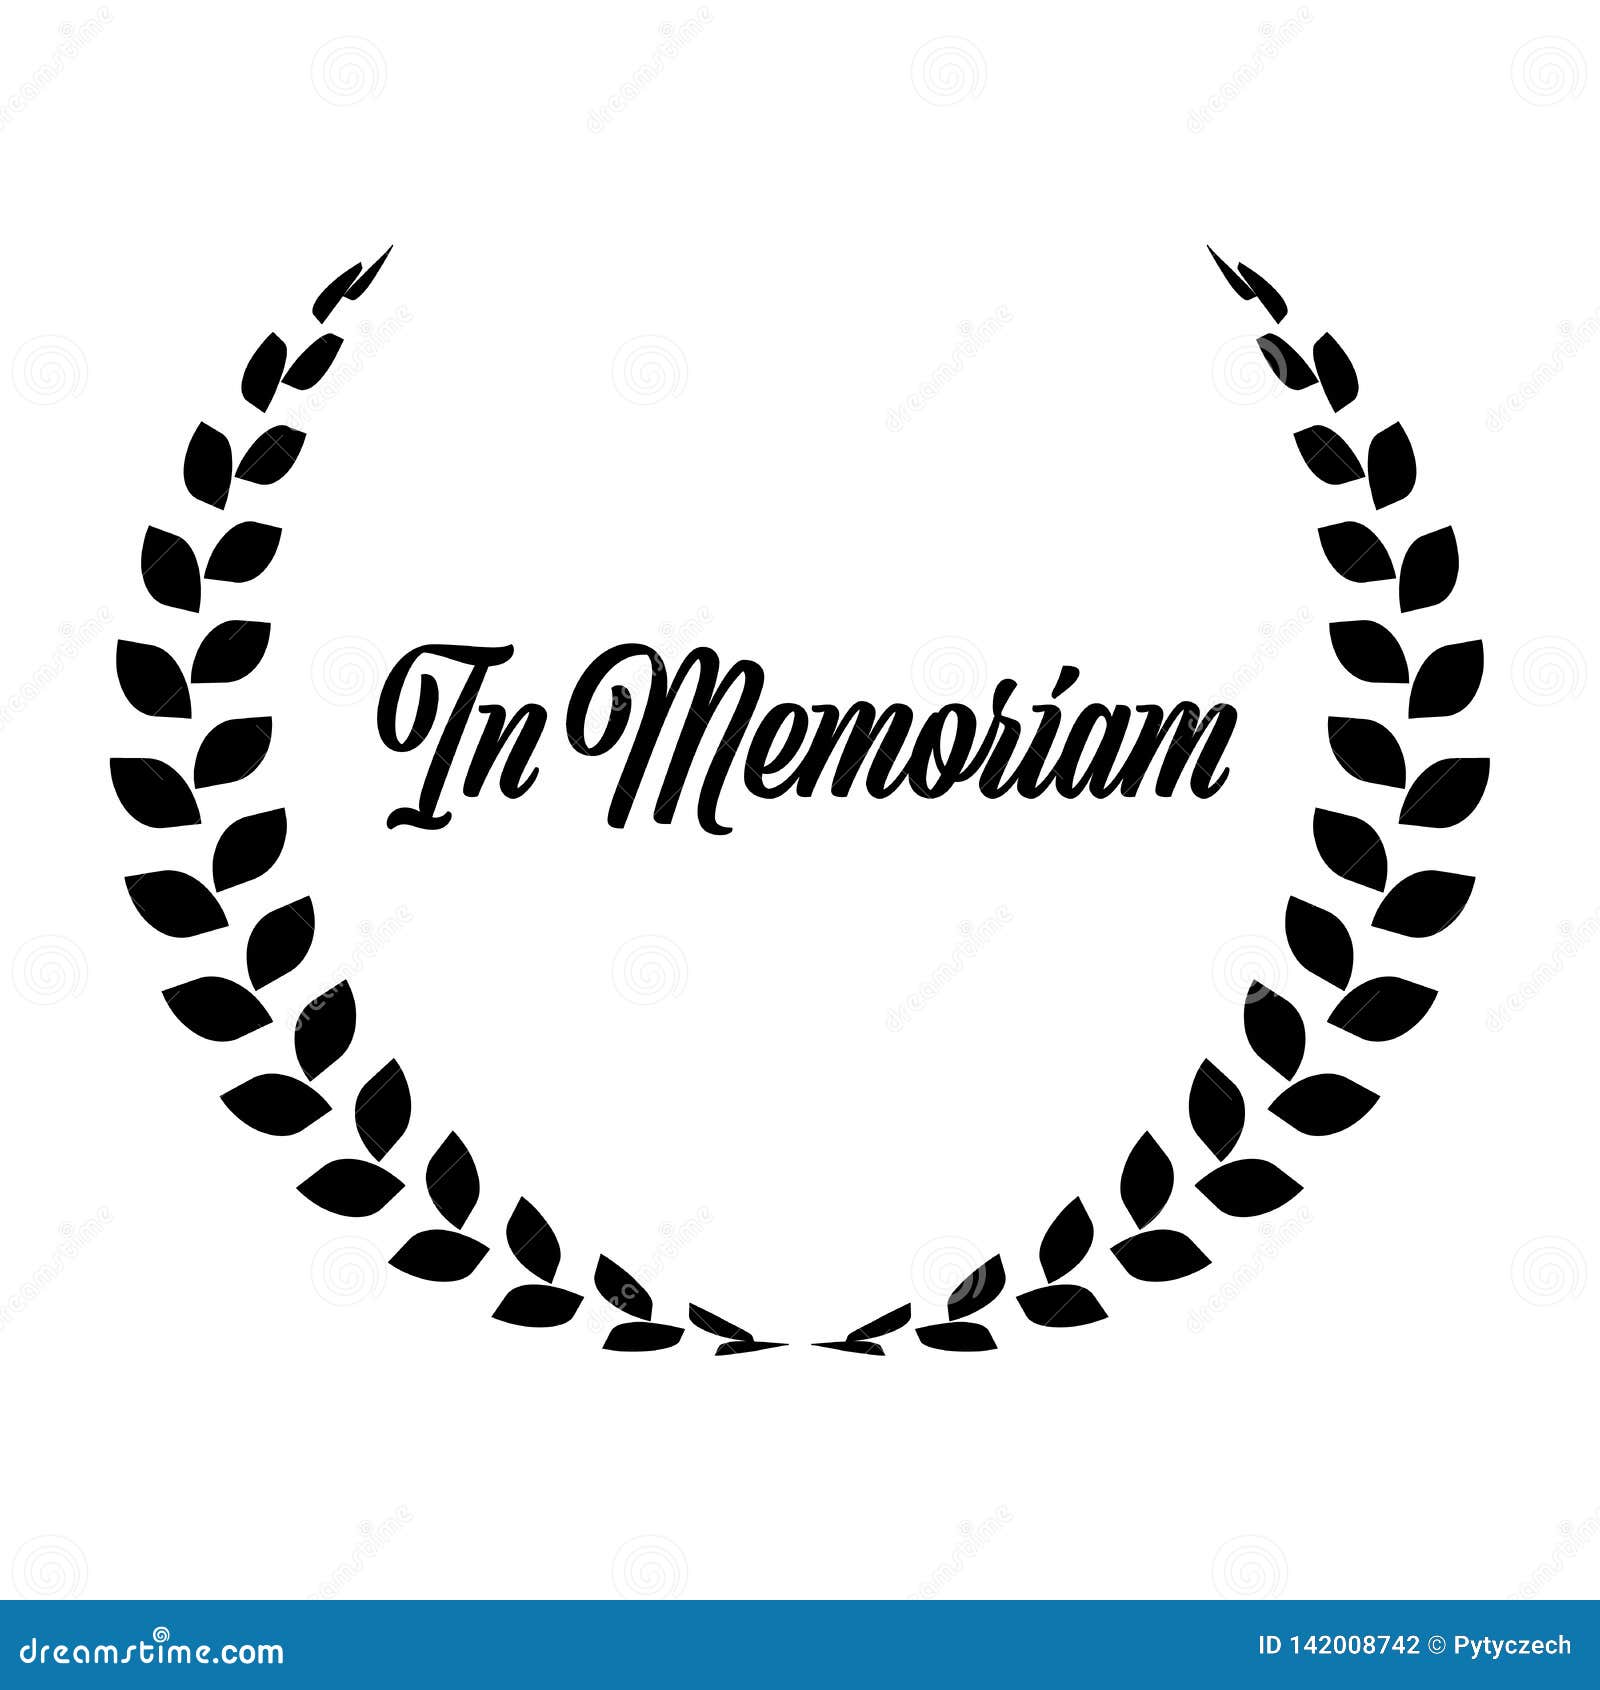 funeral wreath with in memoriam label. rest in peace. simple flat black 